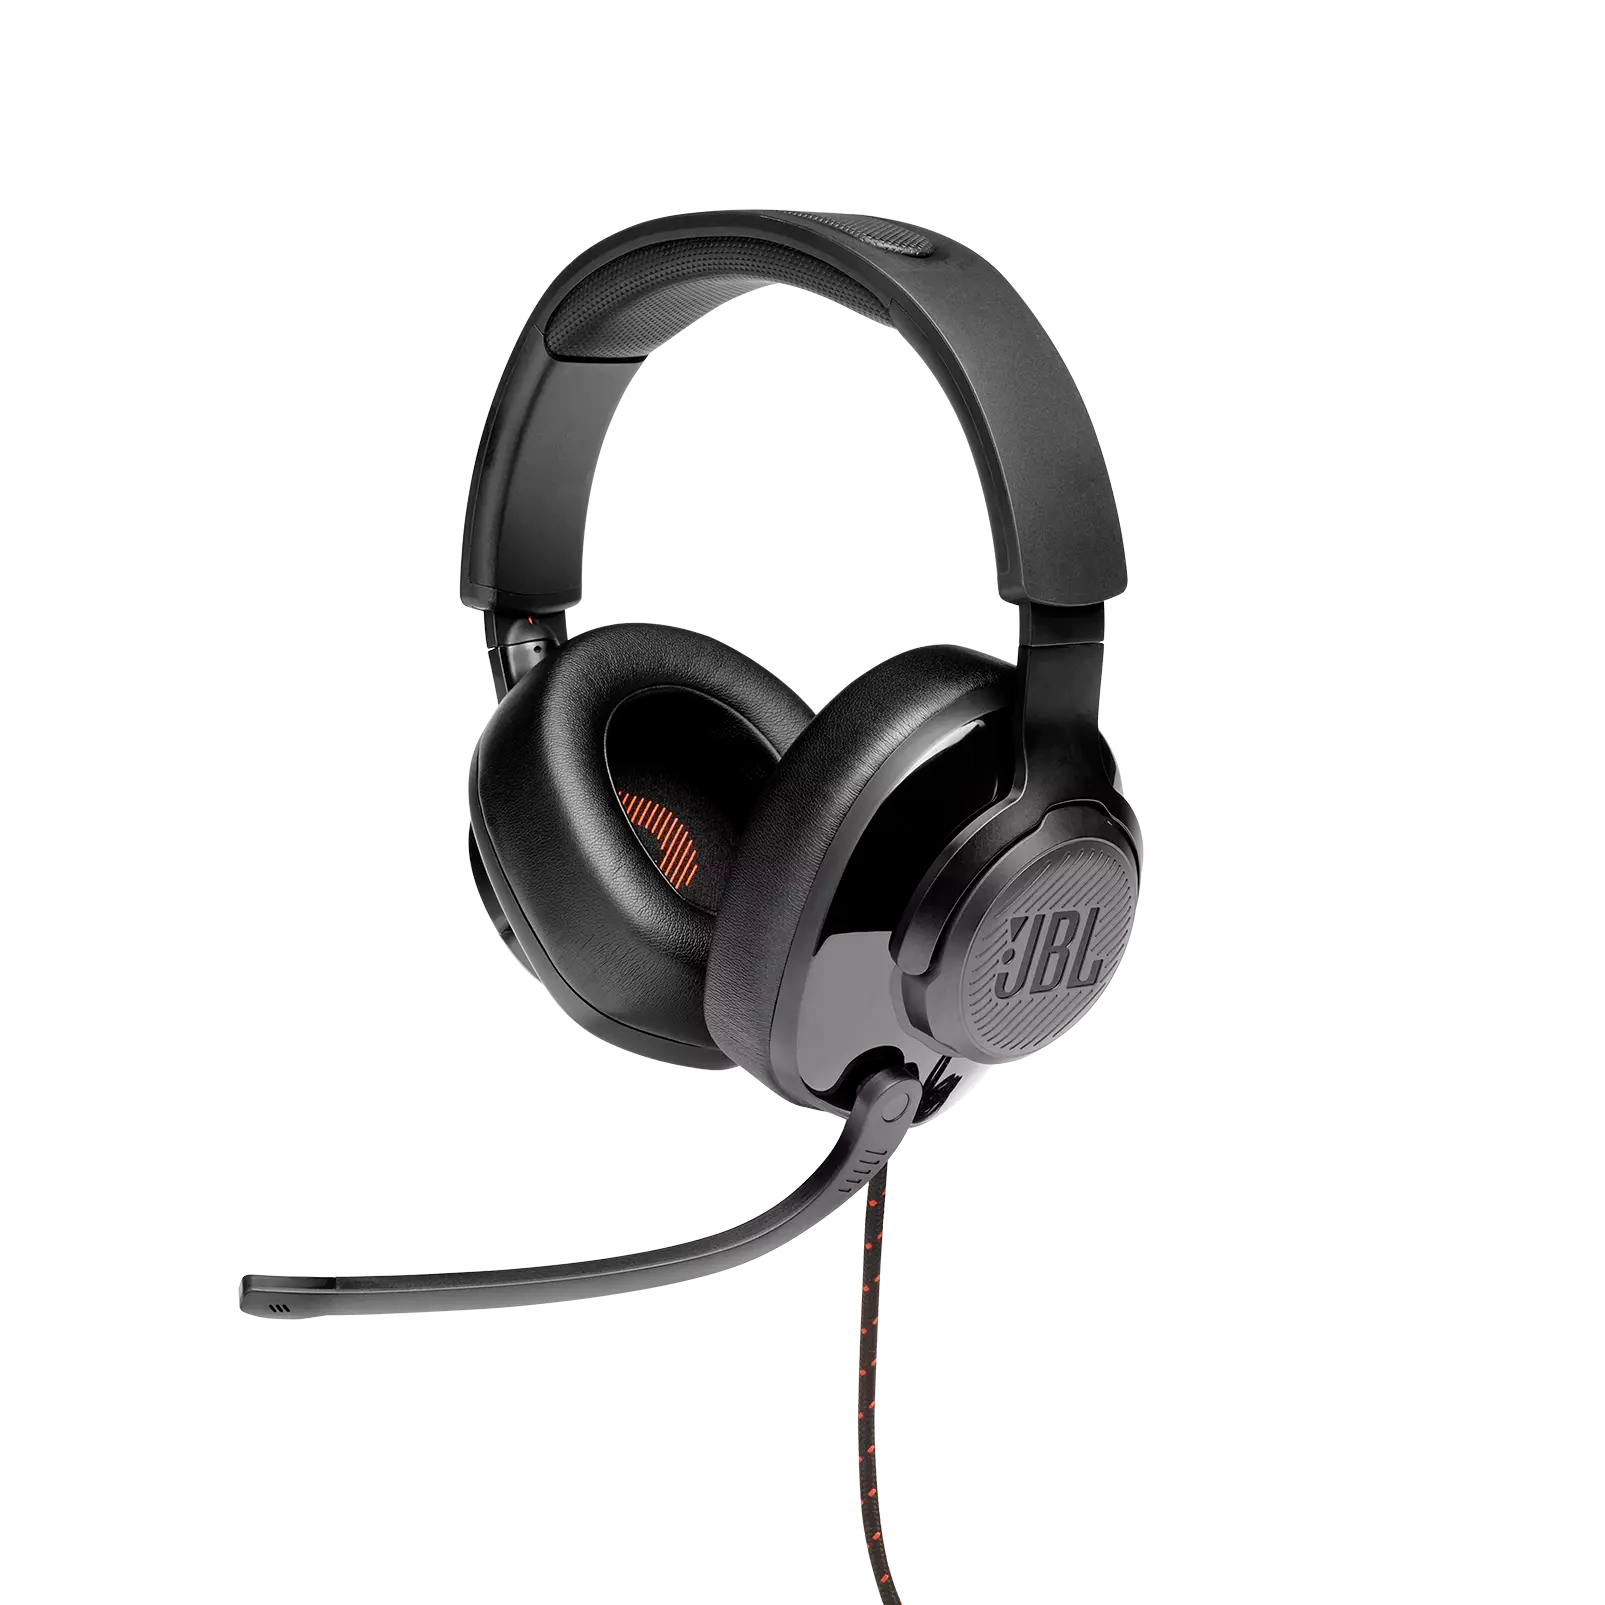 JBL Quantum 300 Hybrid Wired Over-Ear Gaming Headset With Quantum Surround & Flip-Up Mic